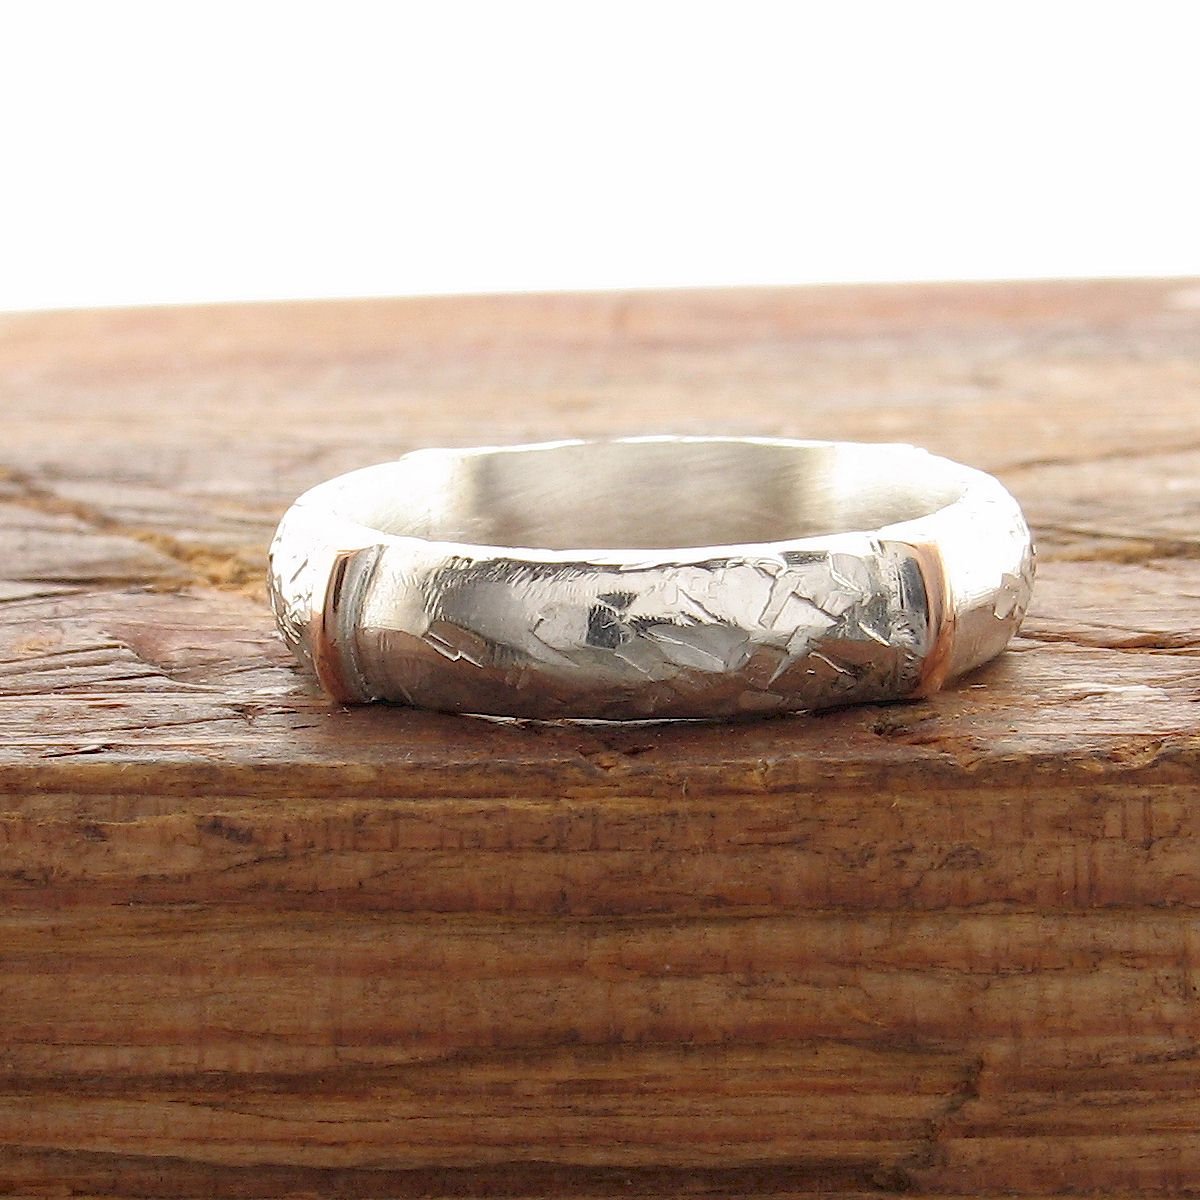 Rustic 4mm wedding ring in rose gold and silver, Lakeland Mine White design - Cumbrian Designs